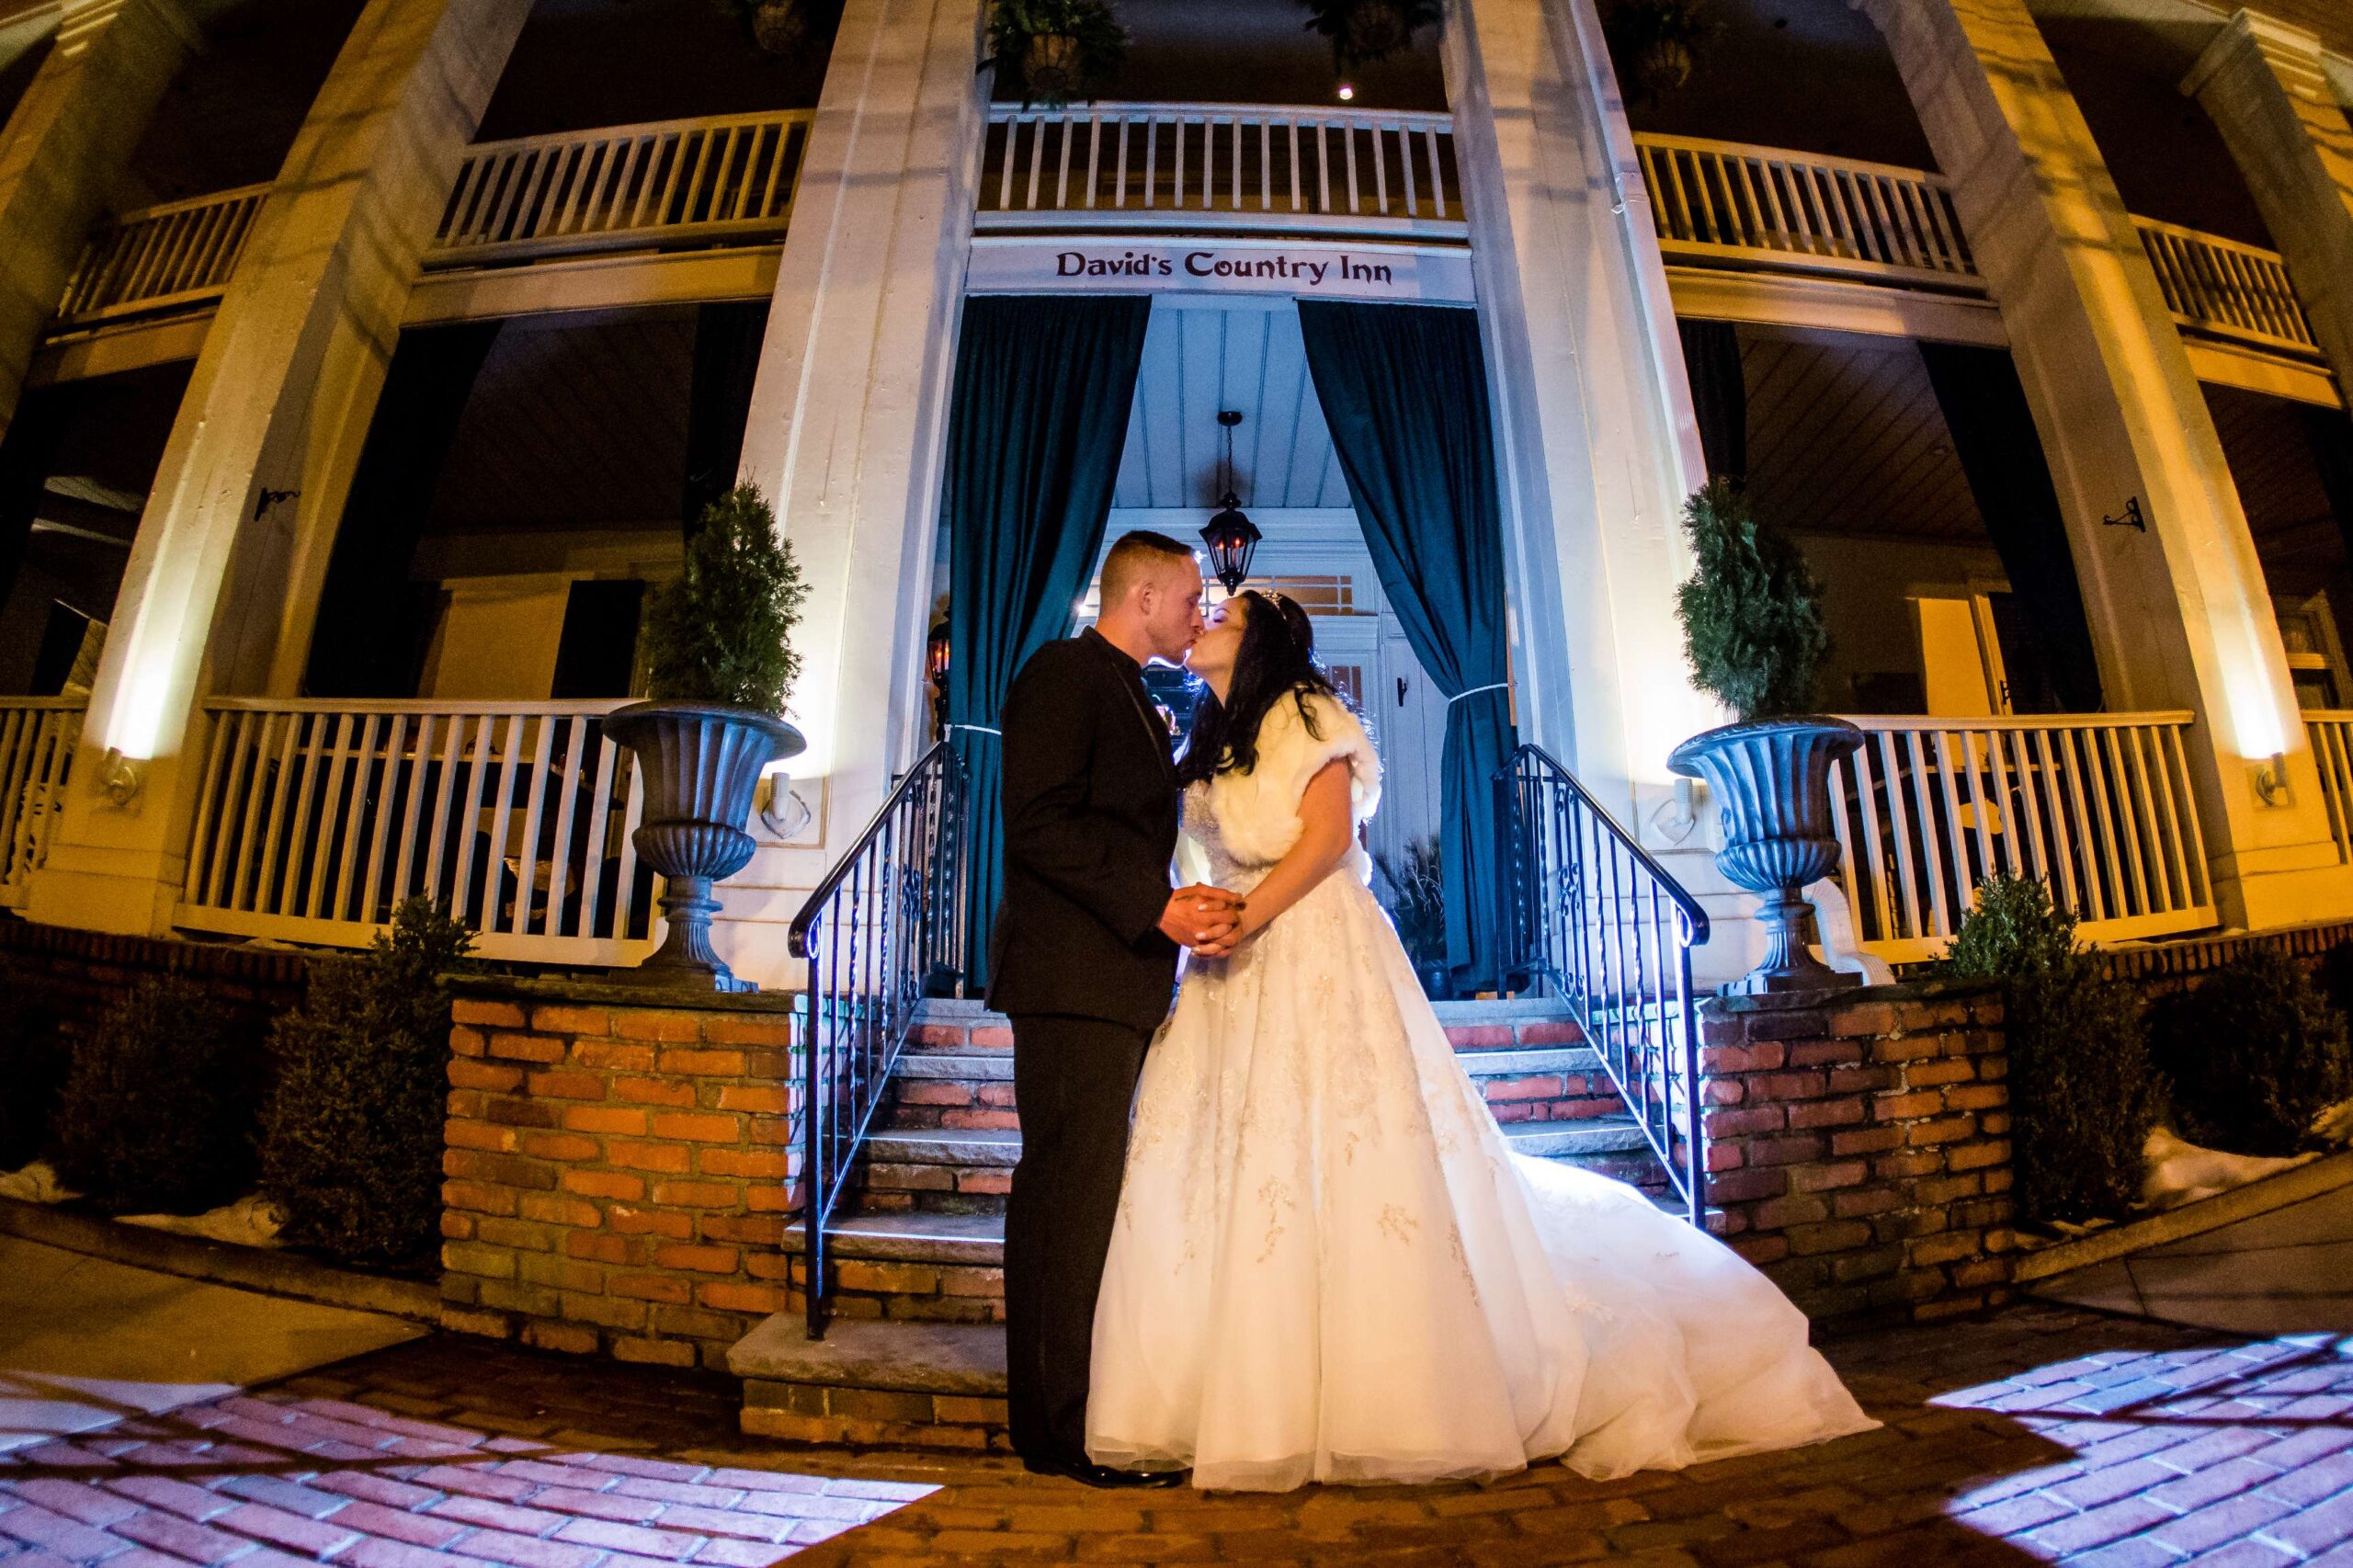 David's Country Inn, Hackettstown, NJ - Wedding Videography and Photography